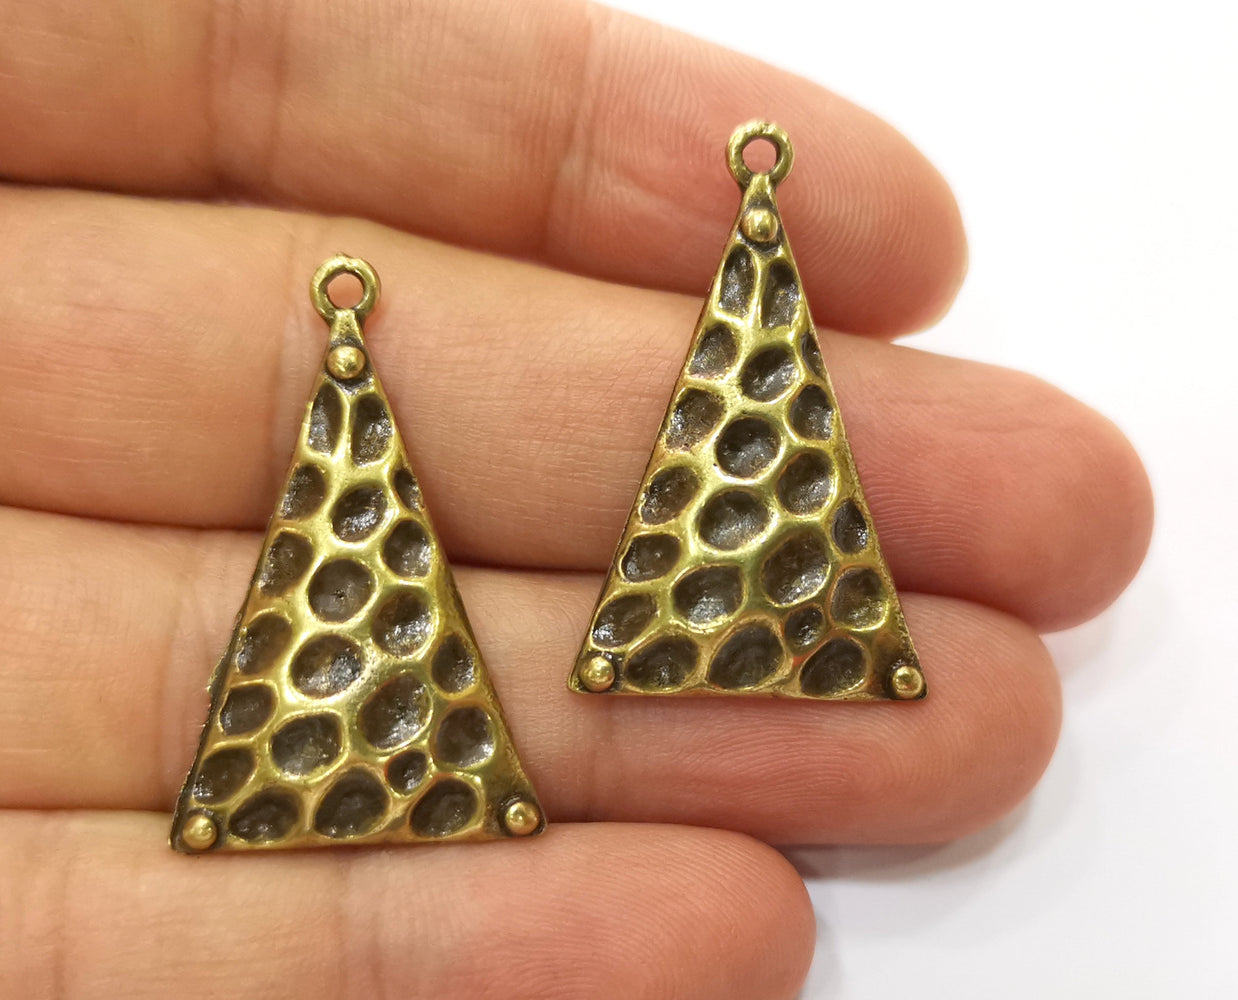 4 Hammered Triangle Charms Antique Bronze Plated Charms (35x21mm)  G18755